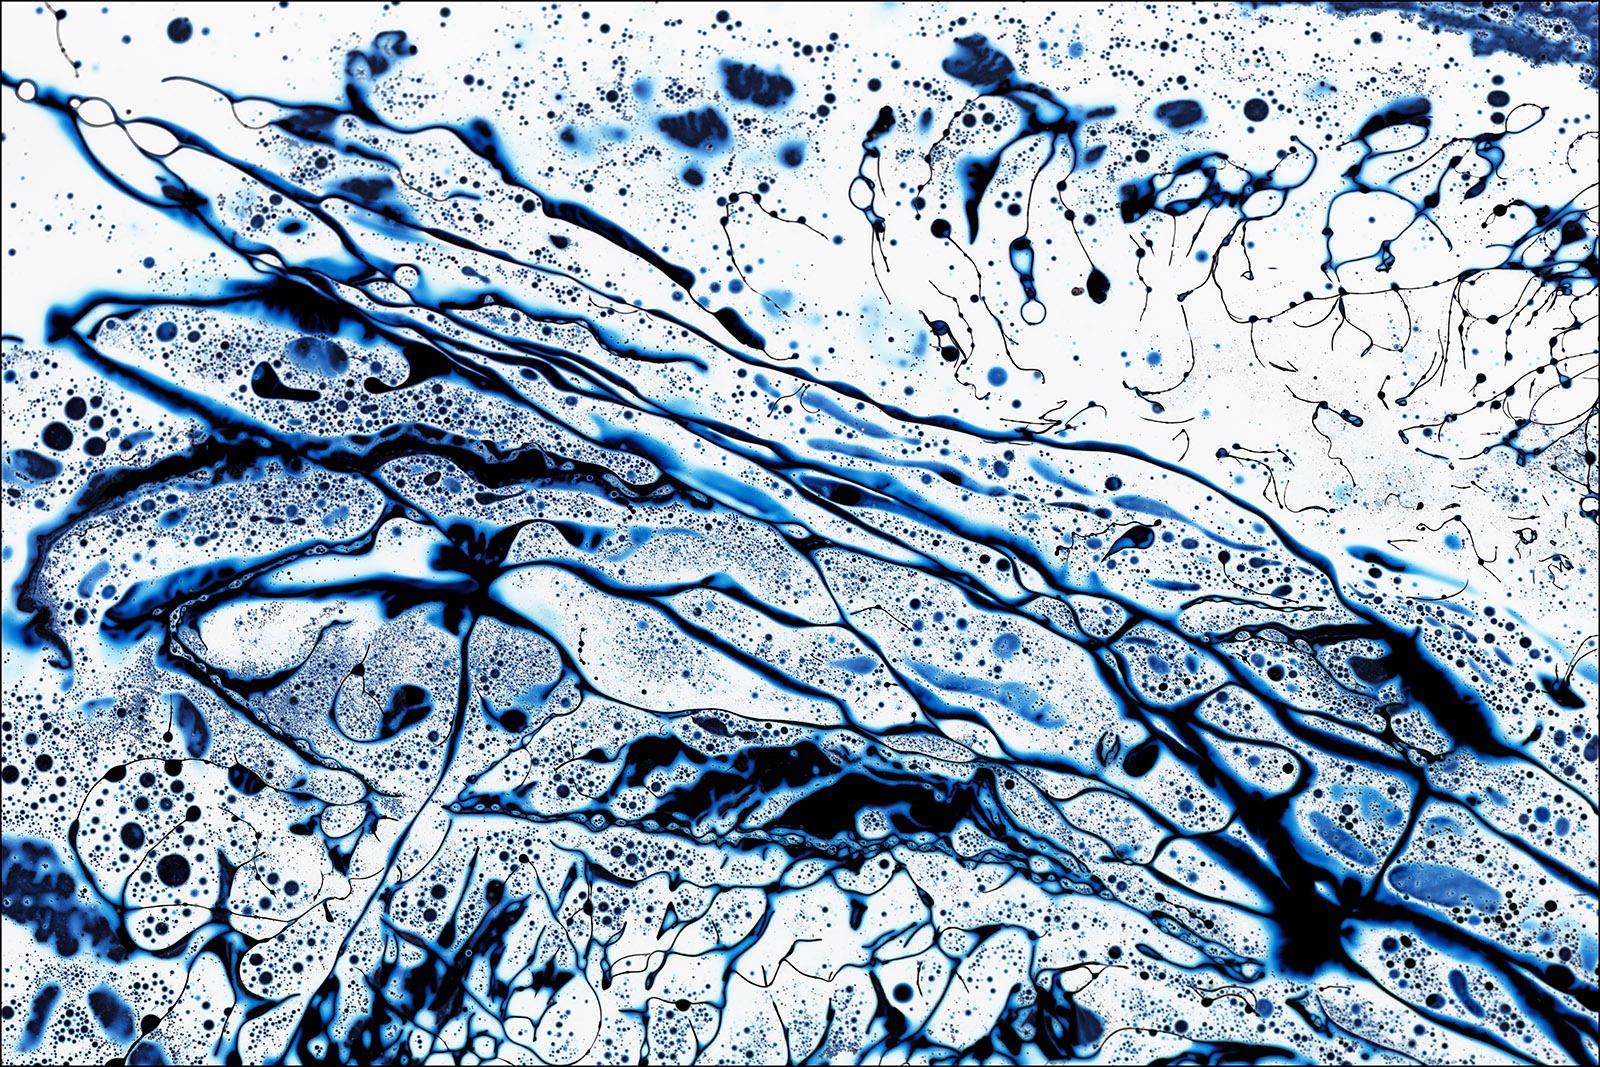 Fluidity 3 - Signed limited edition pigment print, large format color photograph